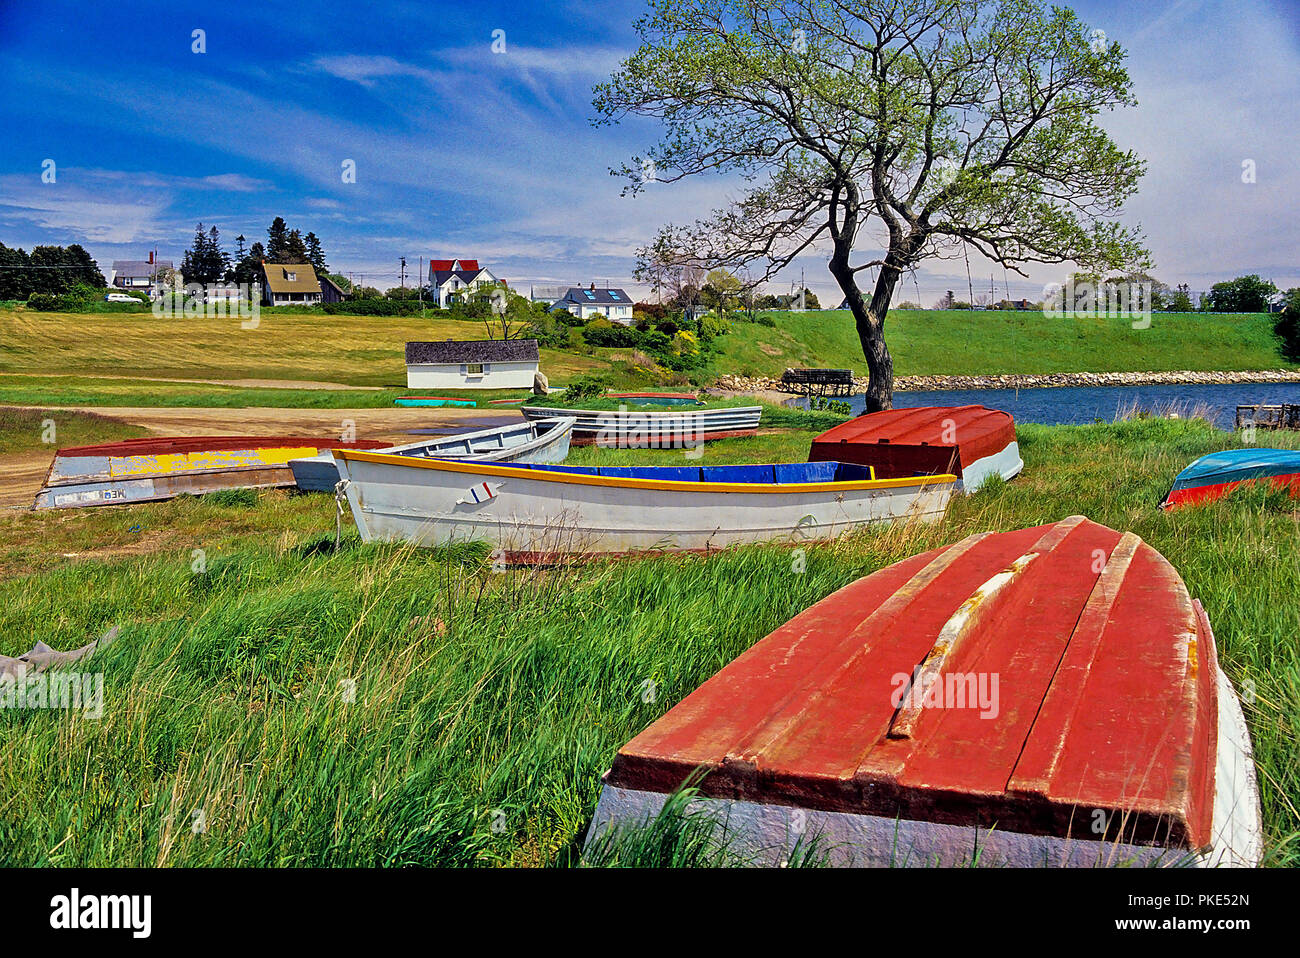 Beached wooden dories or fishing rowboats sit in a field at Bailey Island, Maine, USA. Stock Photo